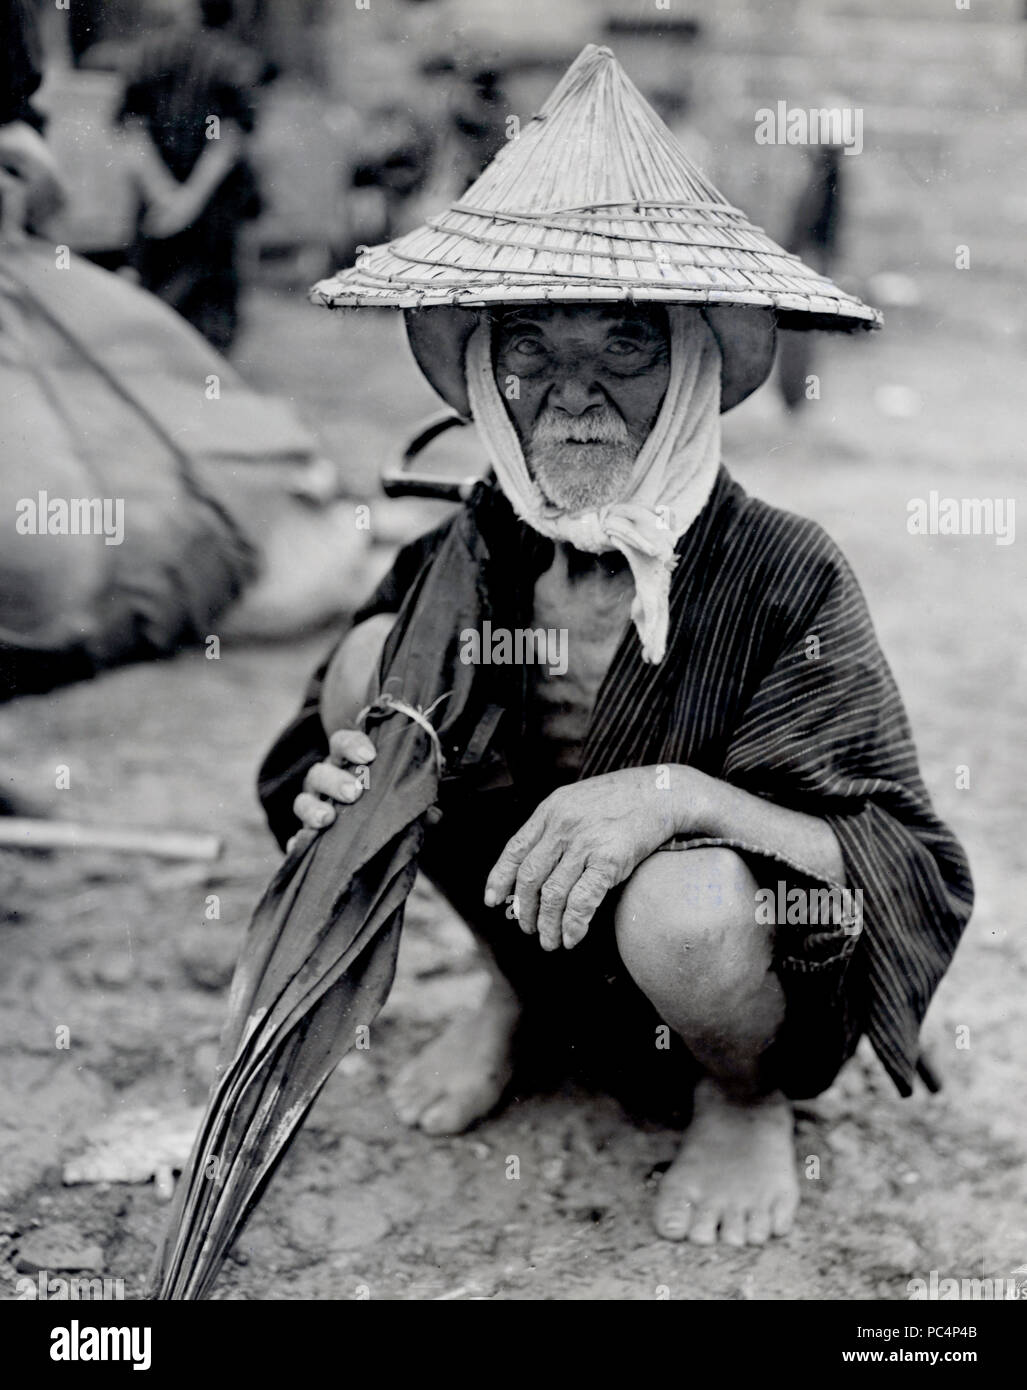 One of the oldest Okinawa natives taken care of by Marines during their invasion of Okinawa Stock Photo